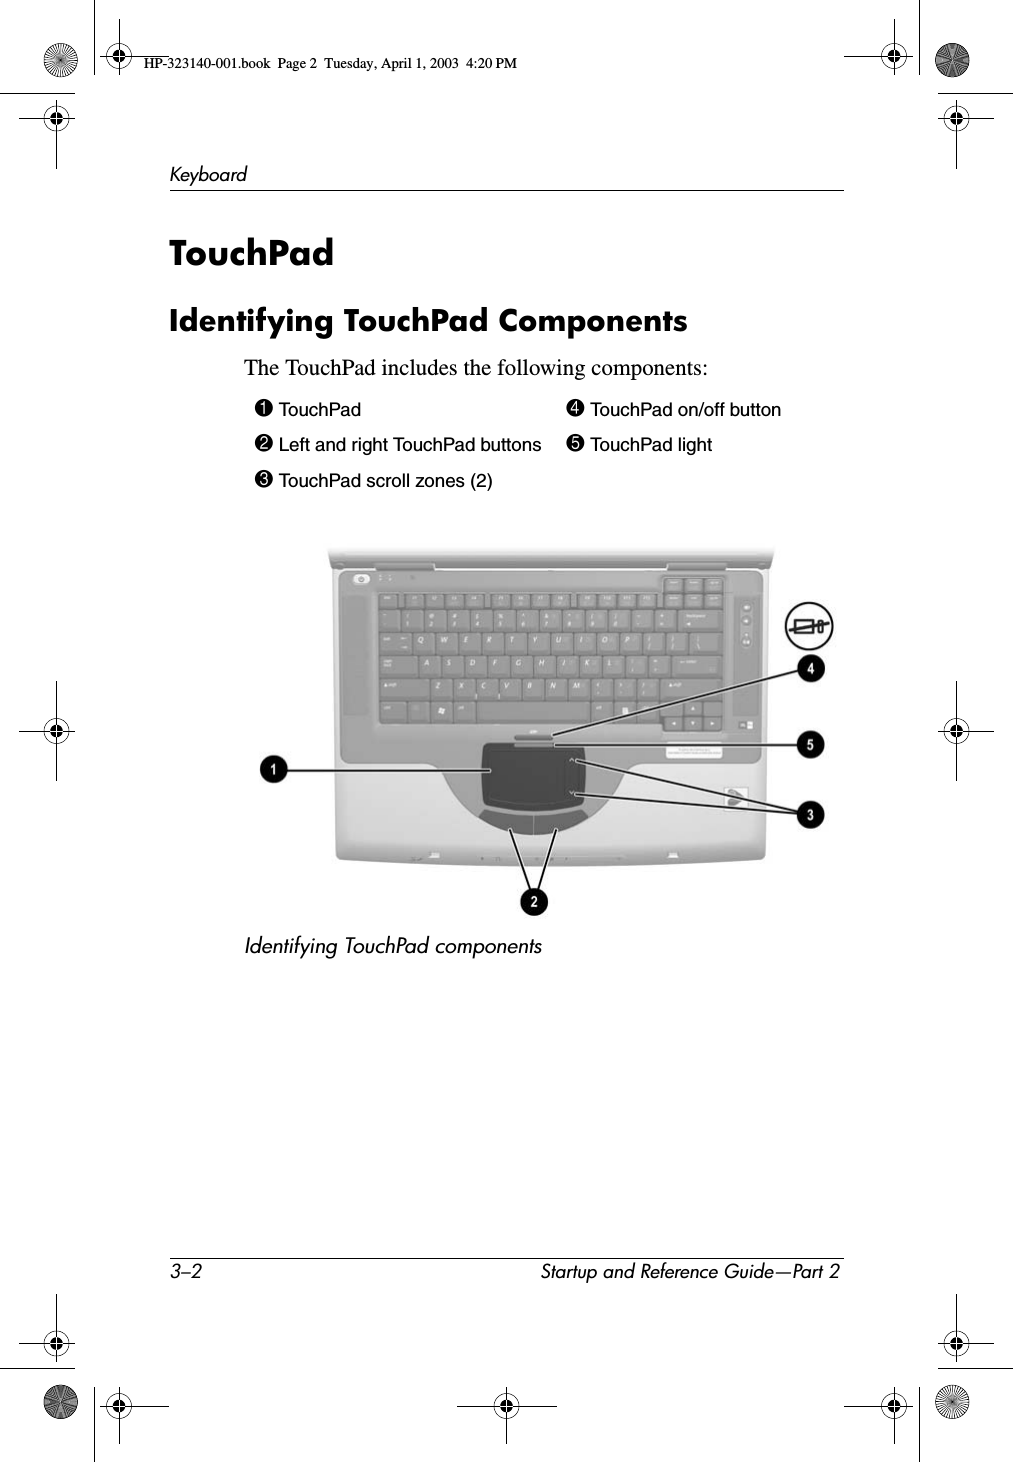 3–2 Startup and Reference Guide—Part 2KeyboardTouchPad Identifying TouchPad ComponentsThe TouchPad includes the following components:Identifying TouchPad components1 TouchPad 4 TouchPad on/off button2 Left and right TouchPad buttons 5 TouchPad light3 TouchPad scroll zones (2)HP-323140-001.book  Page 2  Tuesday, April 1, 2003  4:20 PM